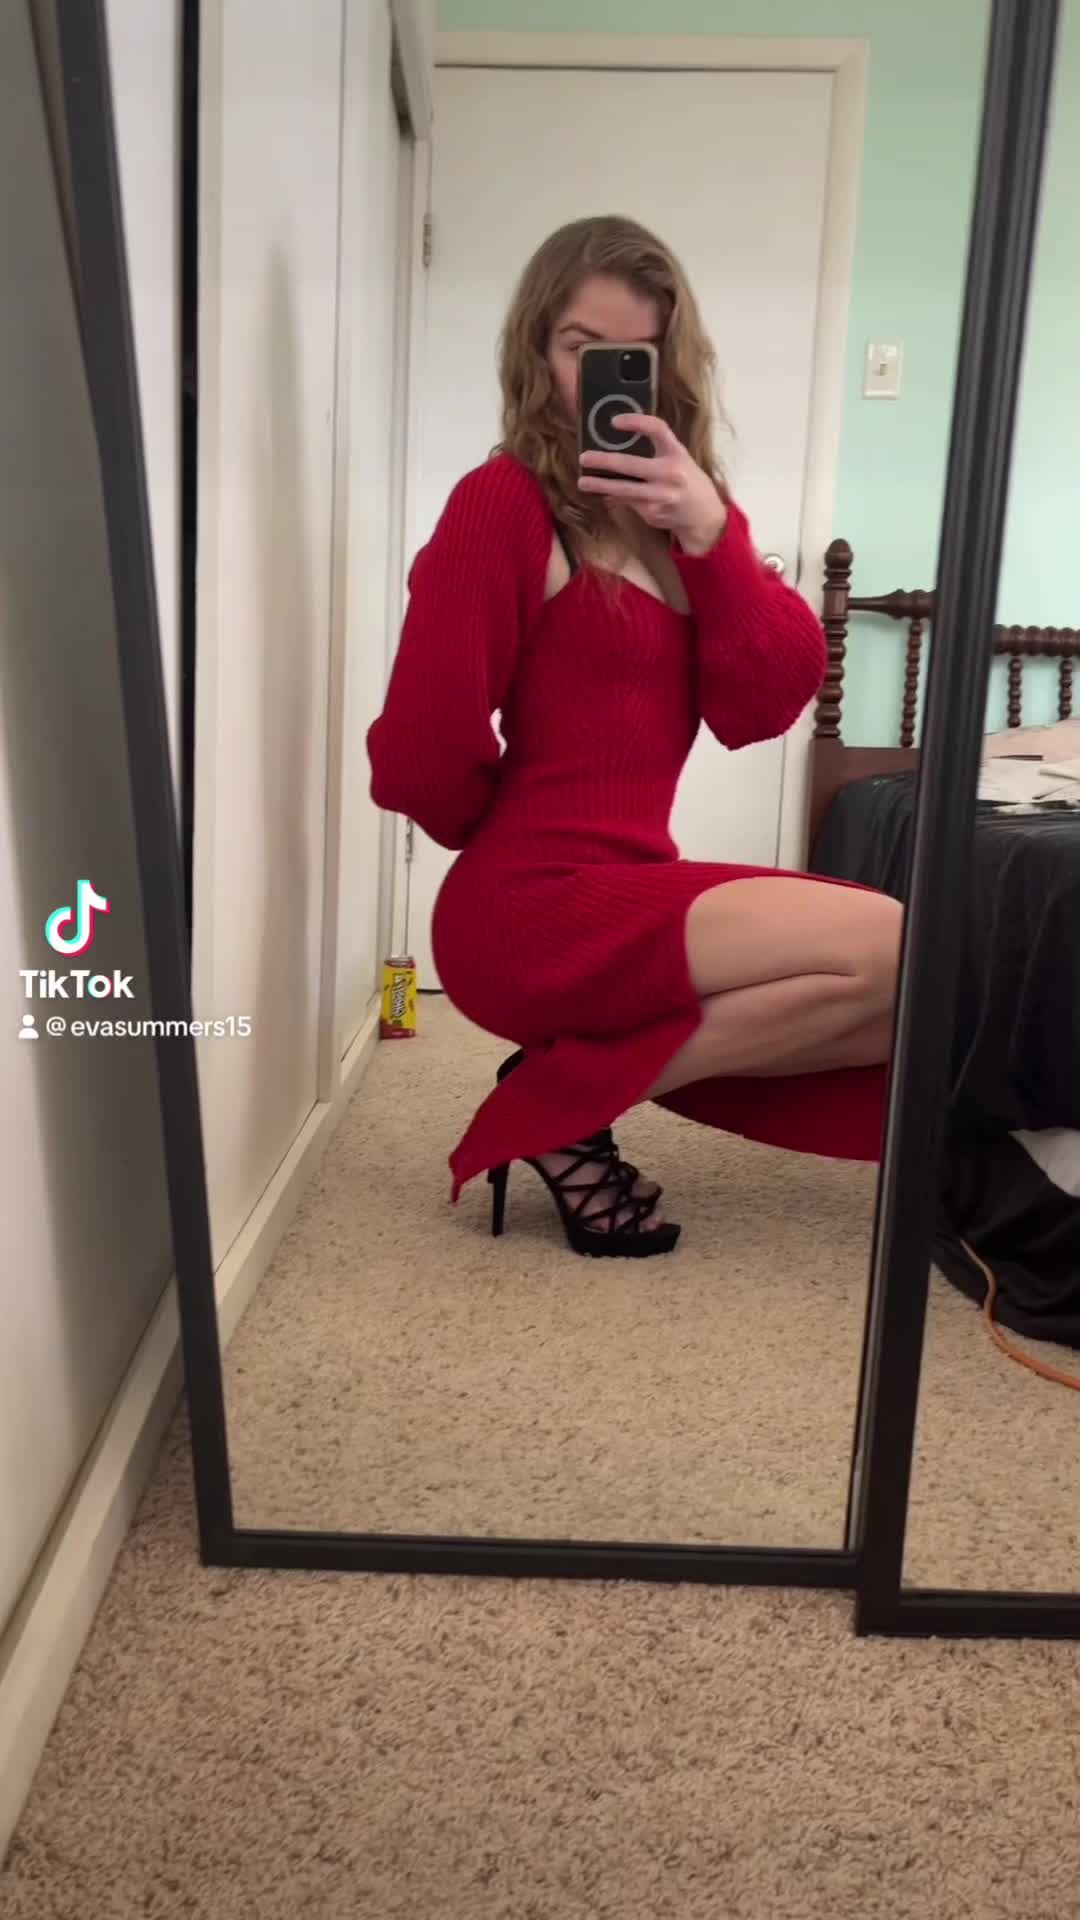 Video by Evasummers with the username @Evasummers, who is a star user,  February 2, 2024 at 11:33 PM. The post is about the topic NSFW TikTok and the text says 'Comment below what position you want to fuck me in the most 😈🥵 #fyp

#girls #hot #horny #sexy #slitdress #trending #foryou #onlyfans #thickthighs #thickass #petite #blonde #goddess #borntobefucked #worship #highheels #wet #tight'